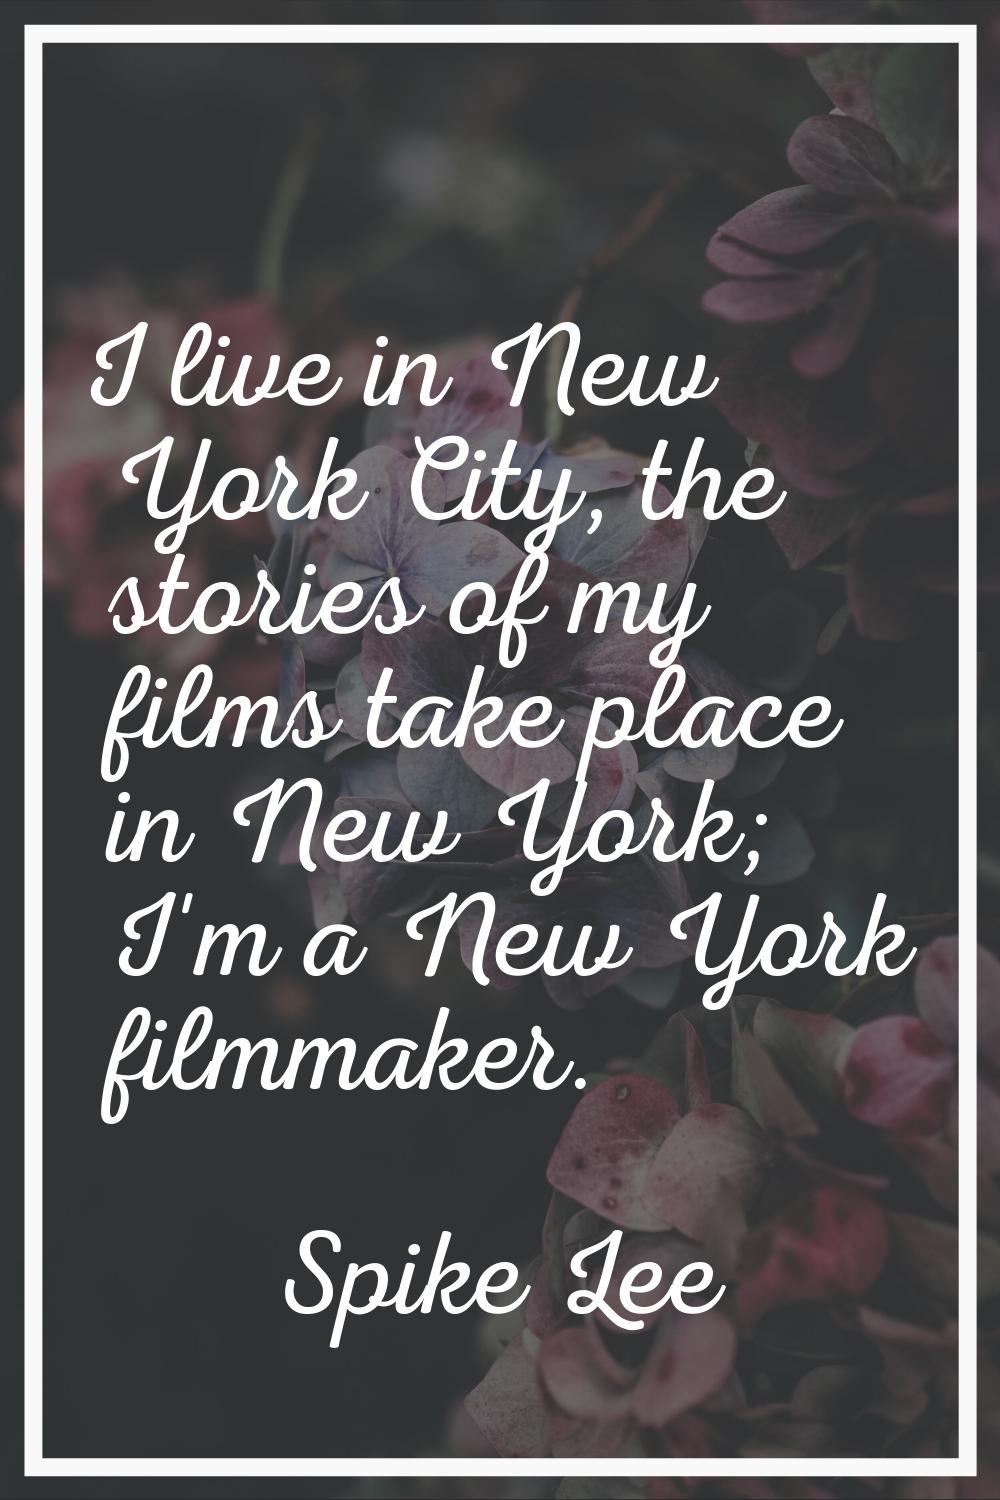 I live in New York City, the stories of my films take place in New York; I'm a New York filmmaker.